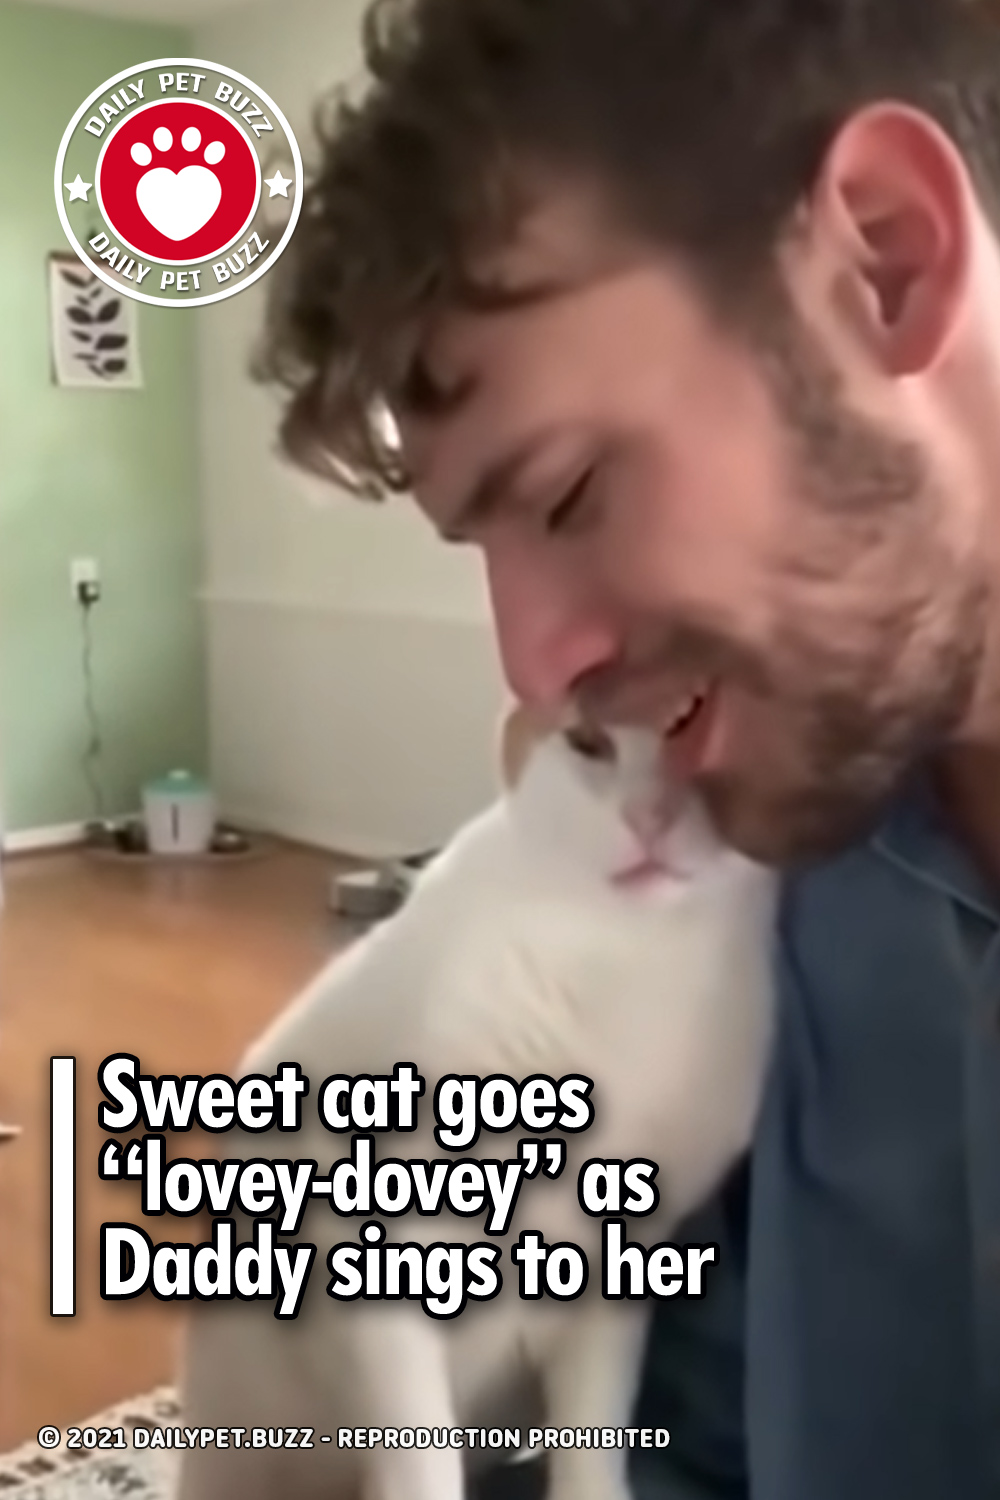 Sweet cat goes “lovey-dovey” as Daddy sings to her